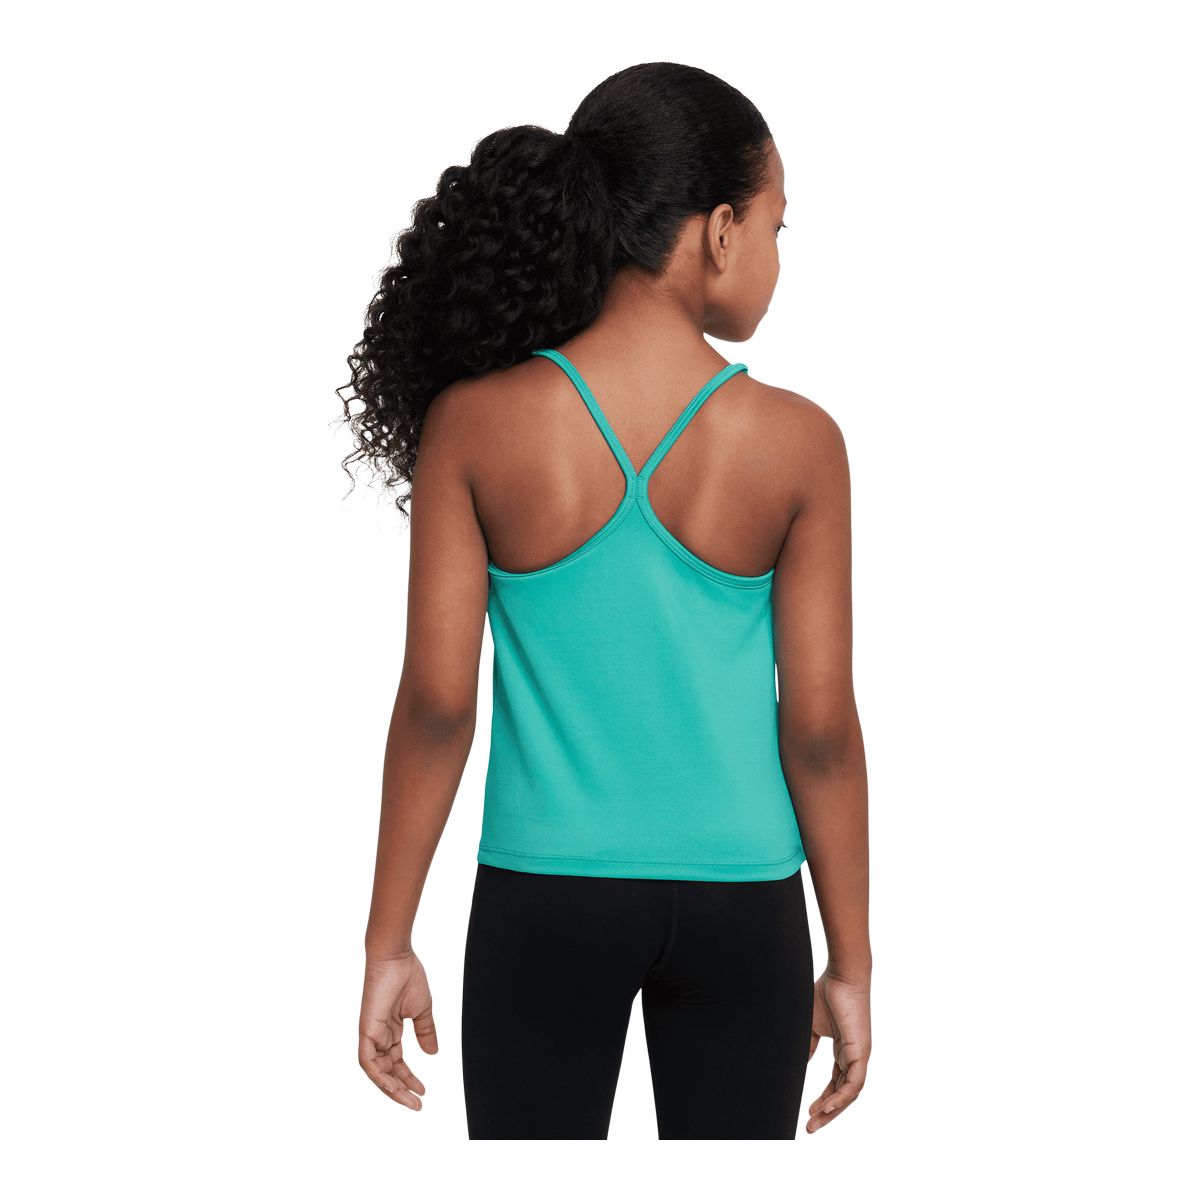 https://media-www.sportchek.ca/product/div-03-softgoods/dpt-72-casual-clothing/sdpt-04-girls/334160053/nike-df-indy-tank-clear-jade-q323--0afe1a86-5508-4c89-82f6-d0fba5a4a888-jpgrendition.jpg?imdensity=1&imwidth=1244&impolicy=mZoom